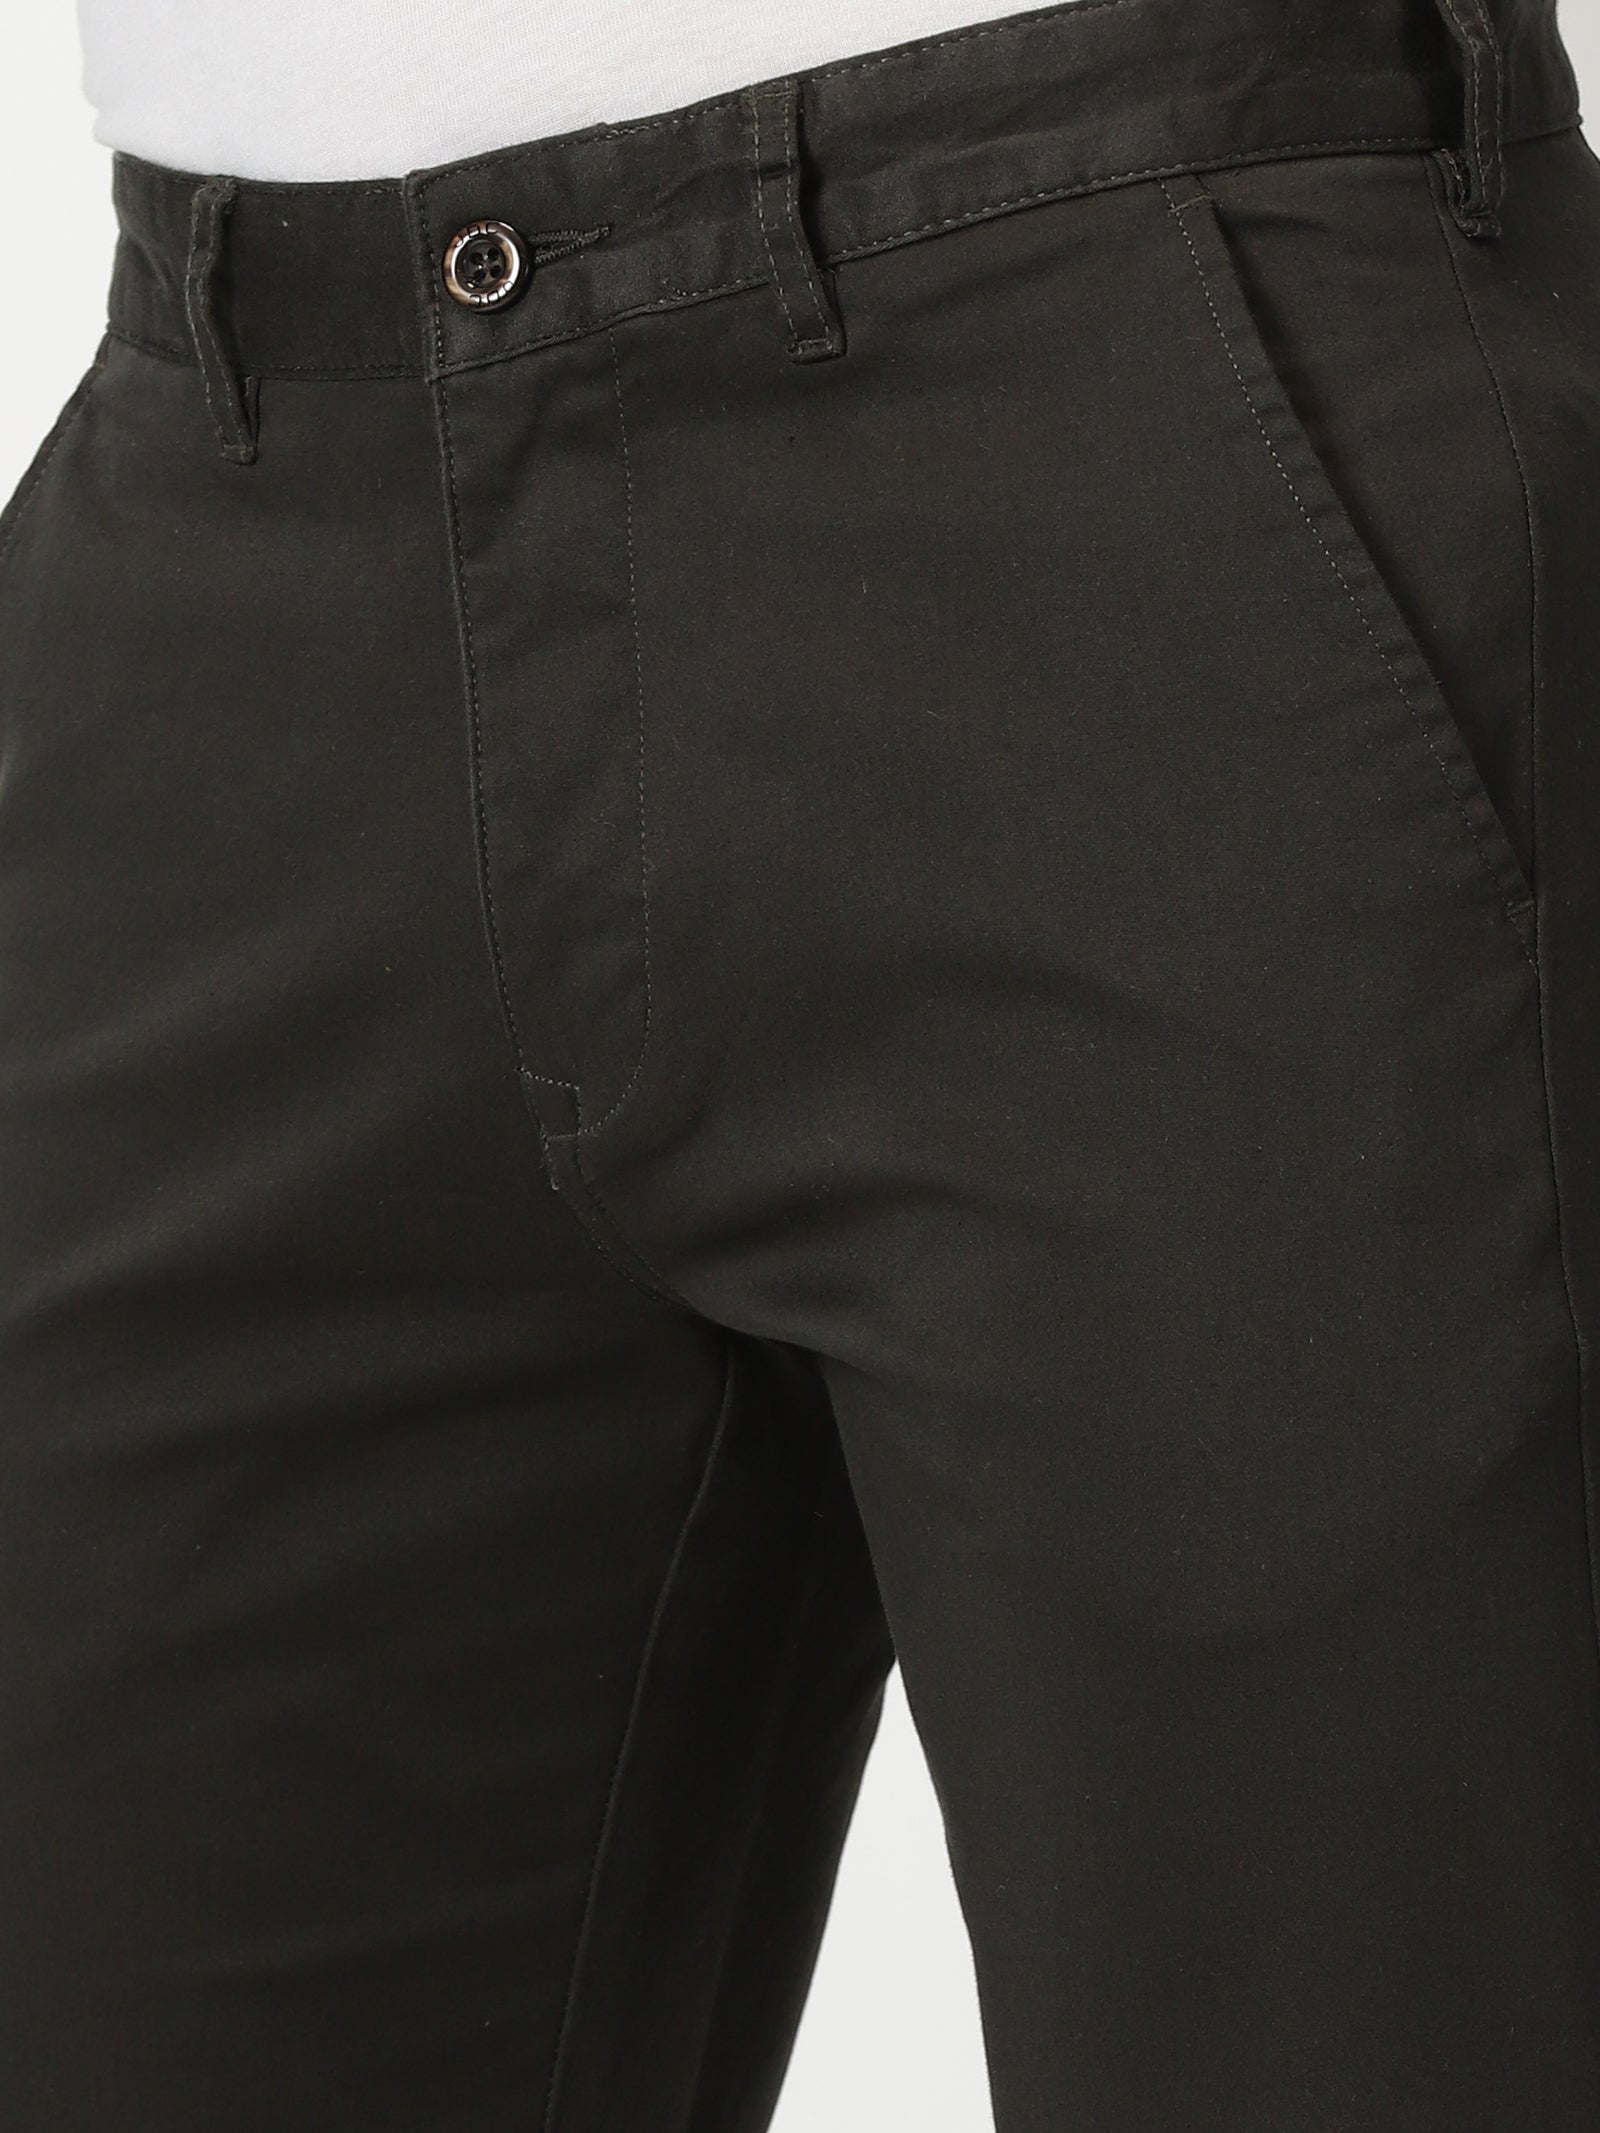 Men's Trousers - Slim Fit Chinos & Jeans